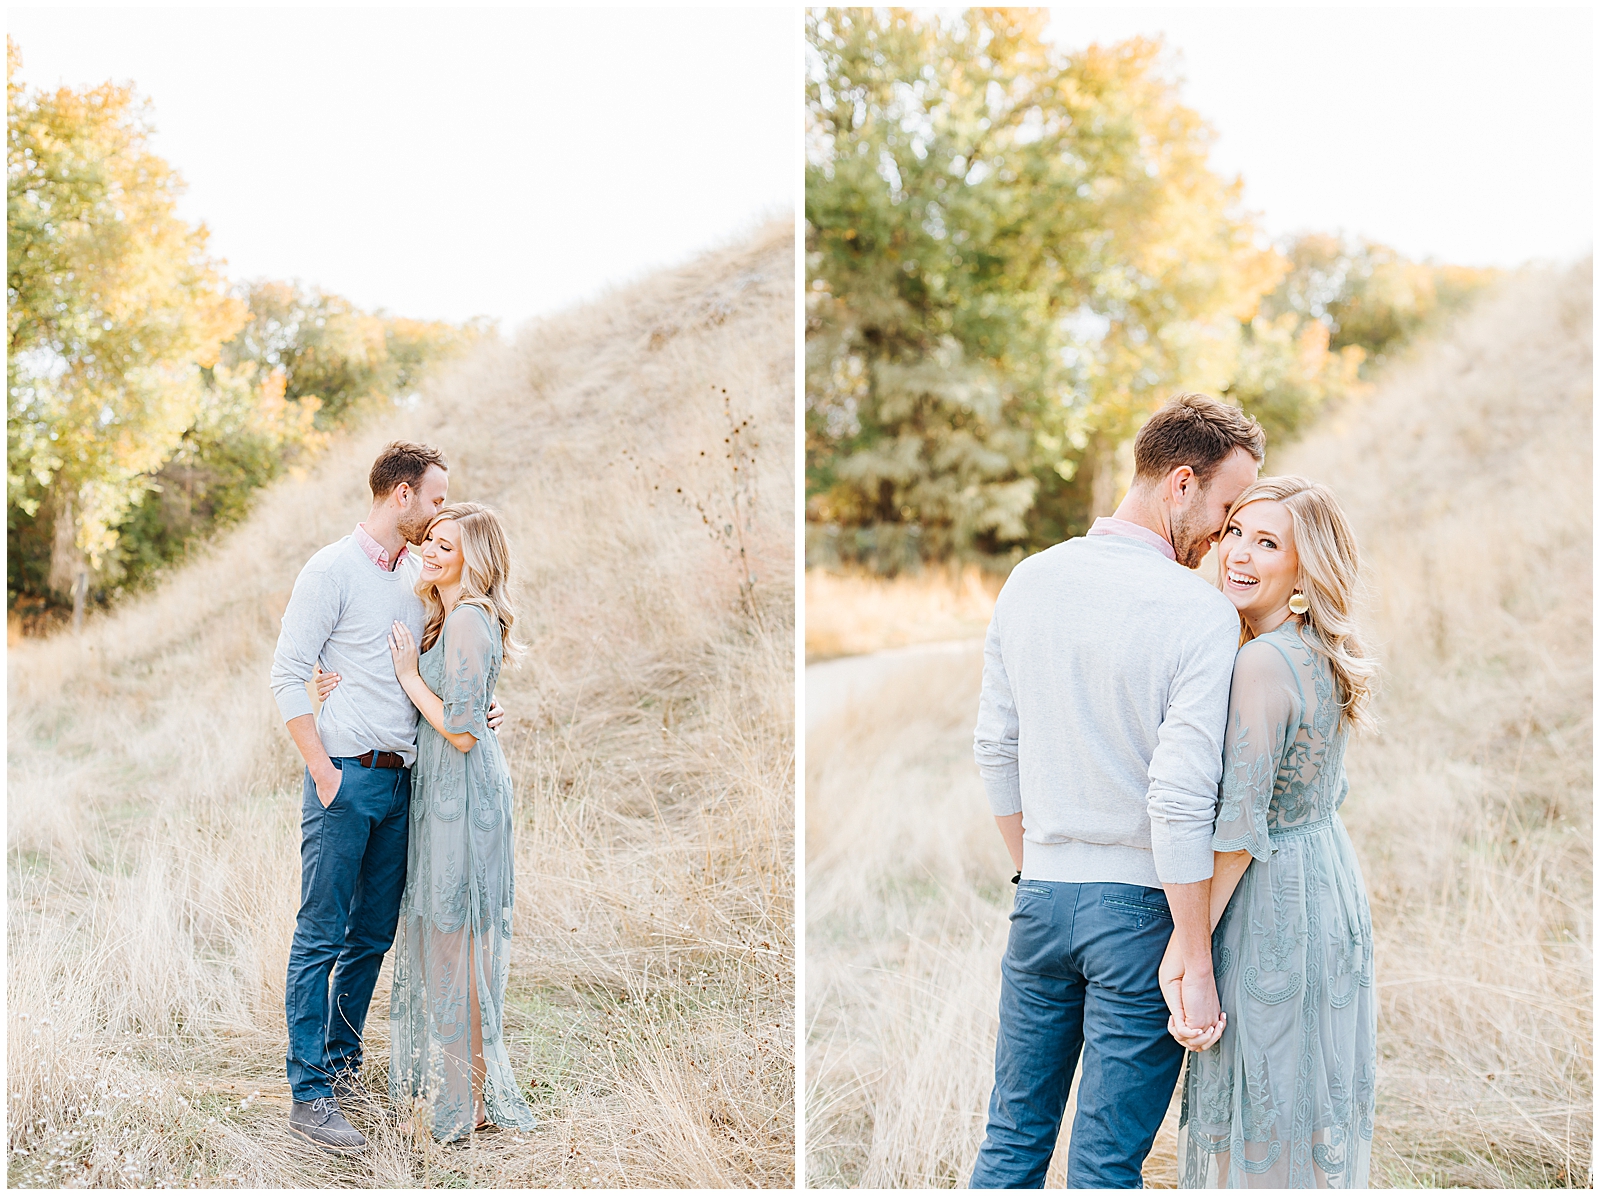 Light and Airy Wedding and Engagement Photographer based in Boise, Idaho